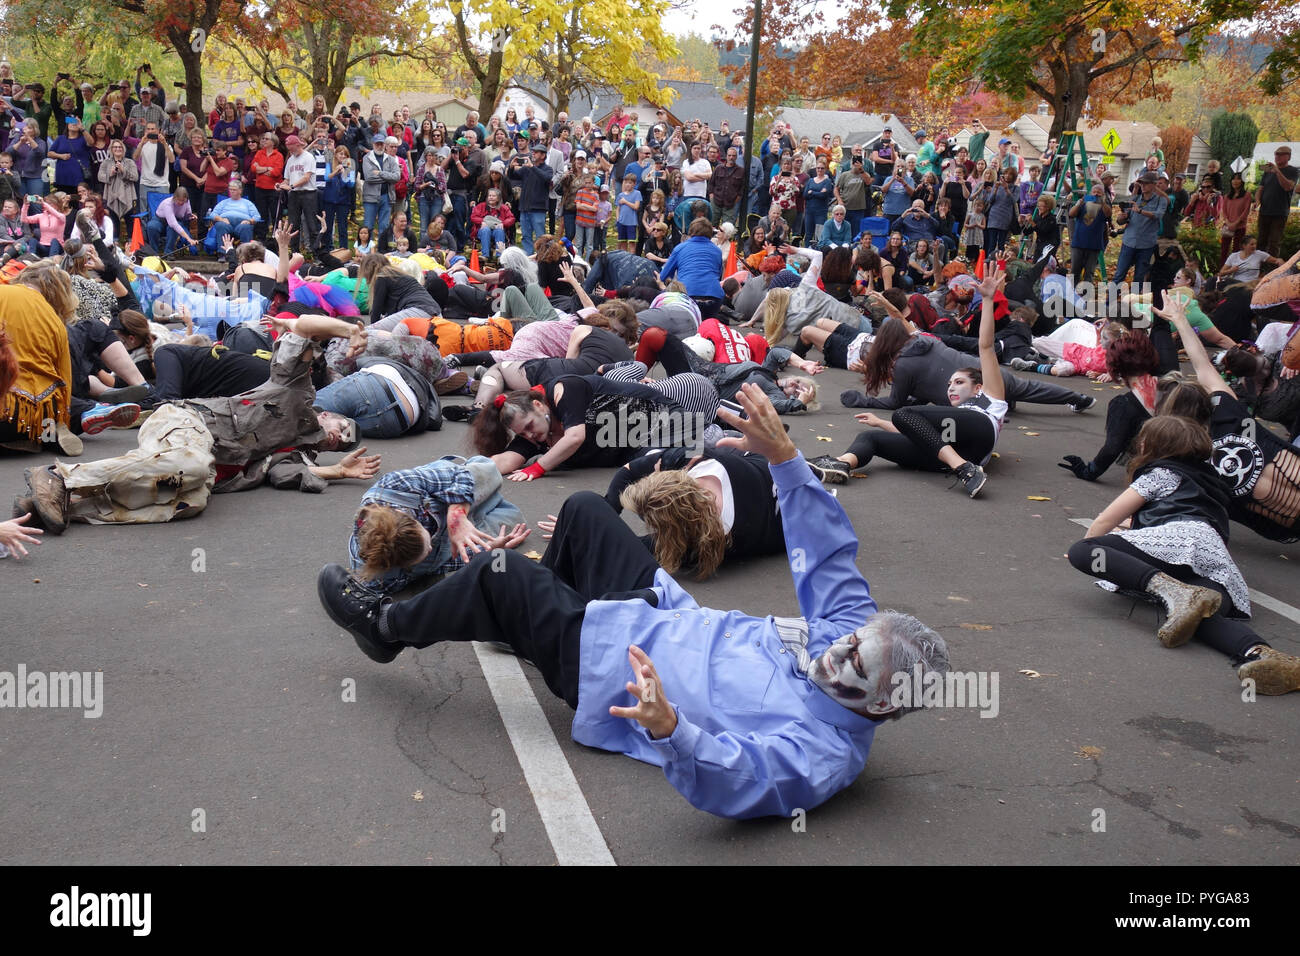 Eugene, Oregon, USA. 27th October, 2018. Participants in 'Thrill the World', dressed as zombies, attempt to break the world record for the largest simultaneous dance to Michael Jackson's 'Thriller', in Eugene, Oregon. Copyright: Gina Kelly/Alamy Live News Stock Photo